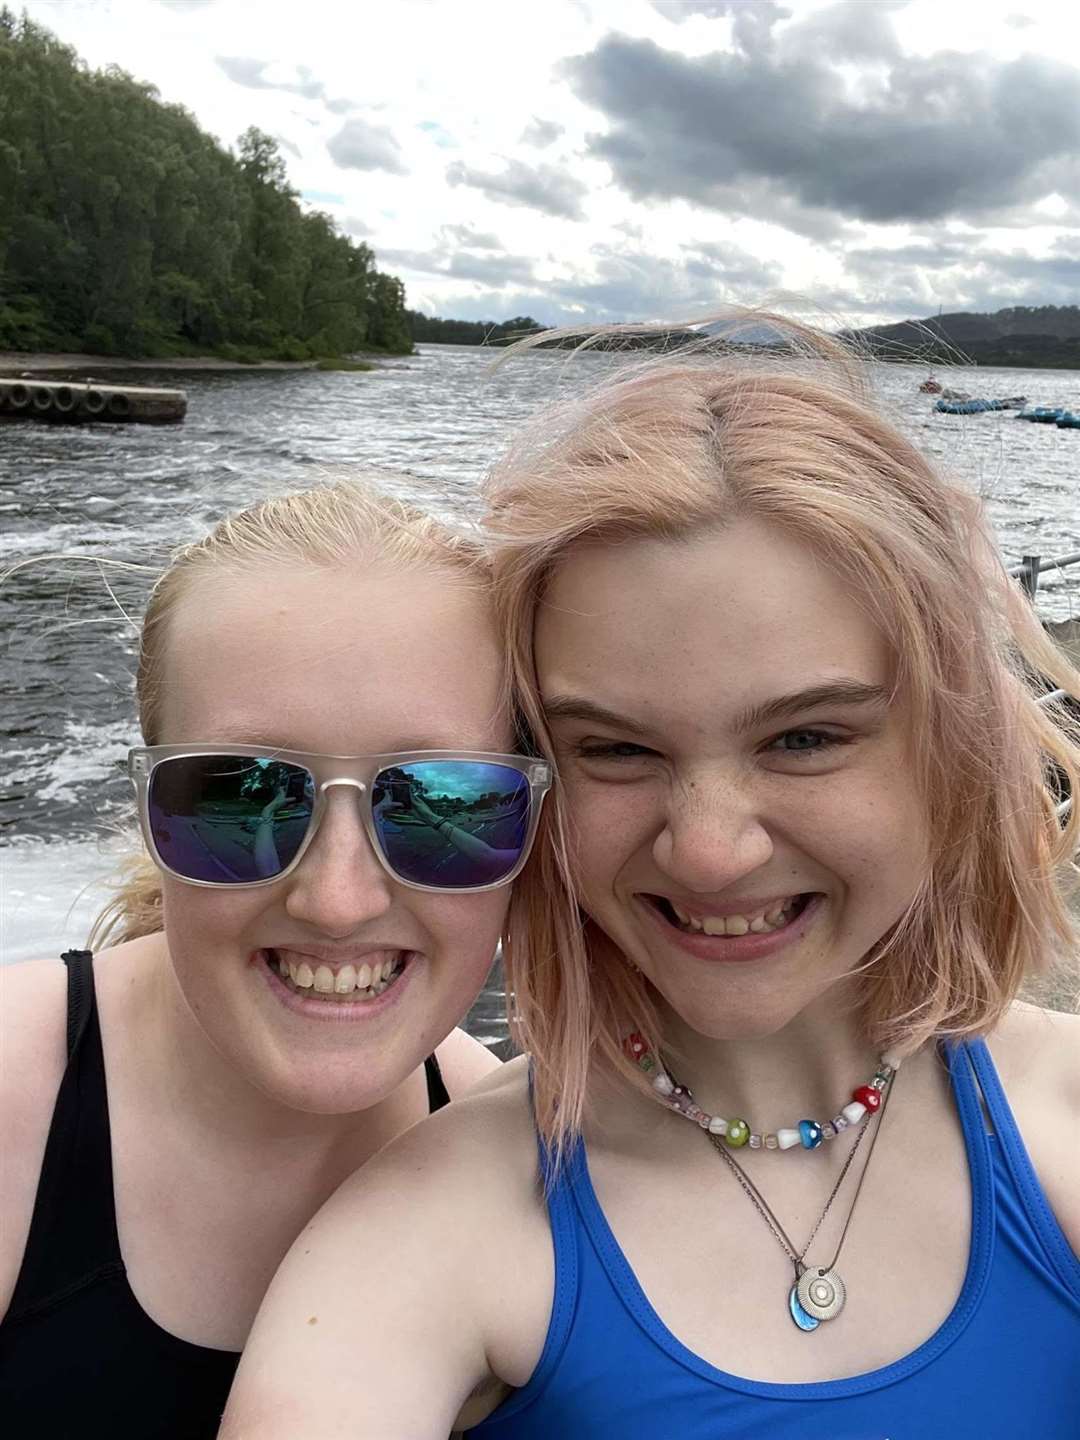 Rachel Mitchell and Sophie Thomas at Loch Insh.